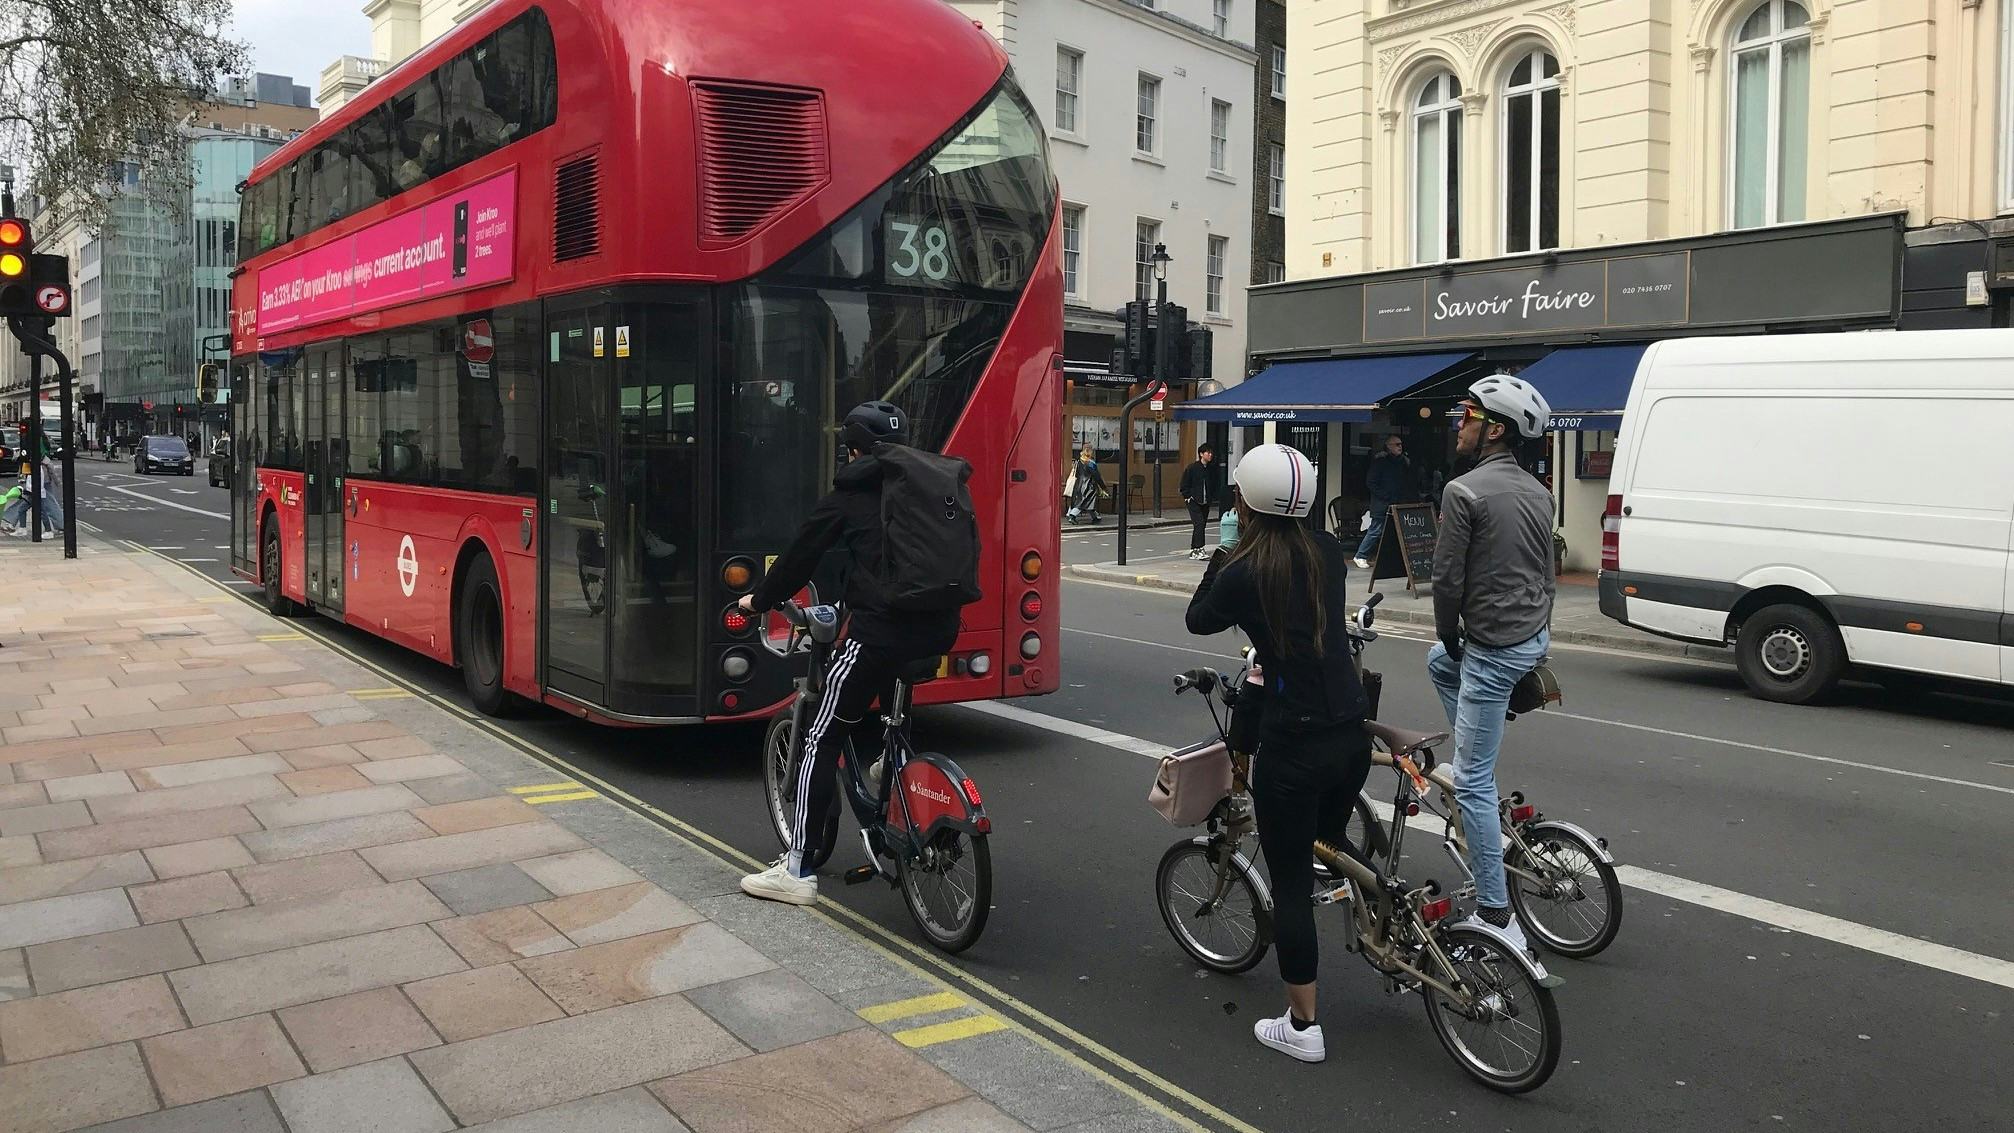 Cyclists sharing the road with busses is a common sight in London. – Photos Bike Europe